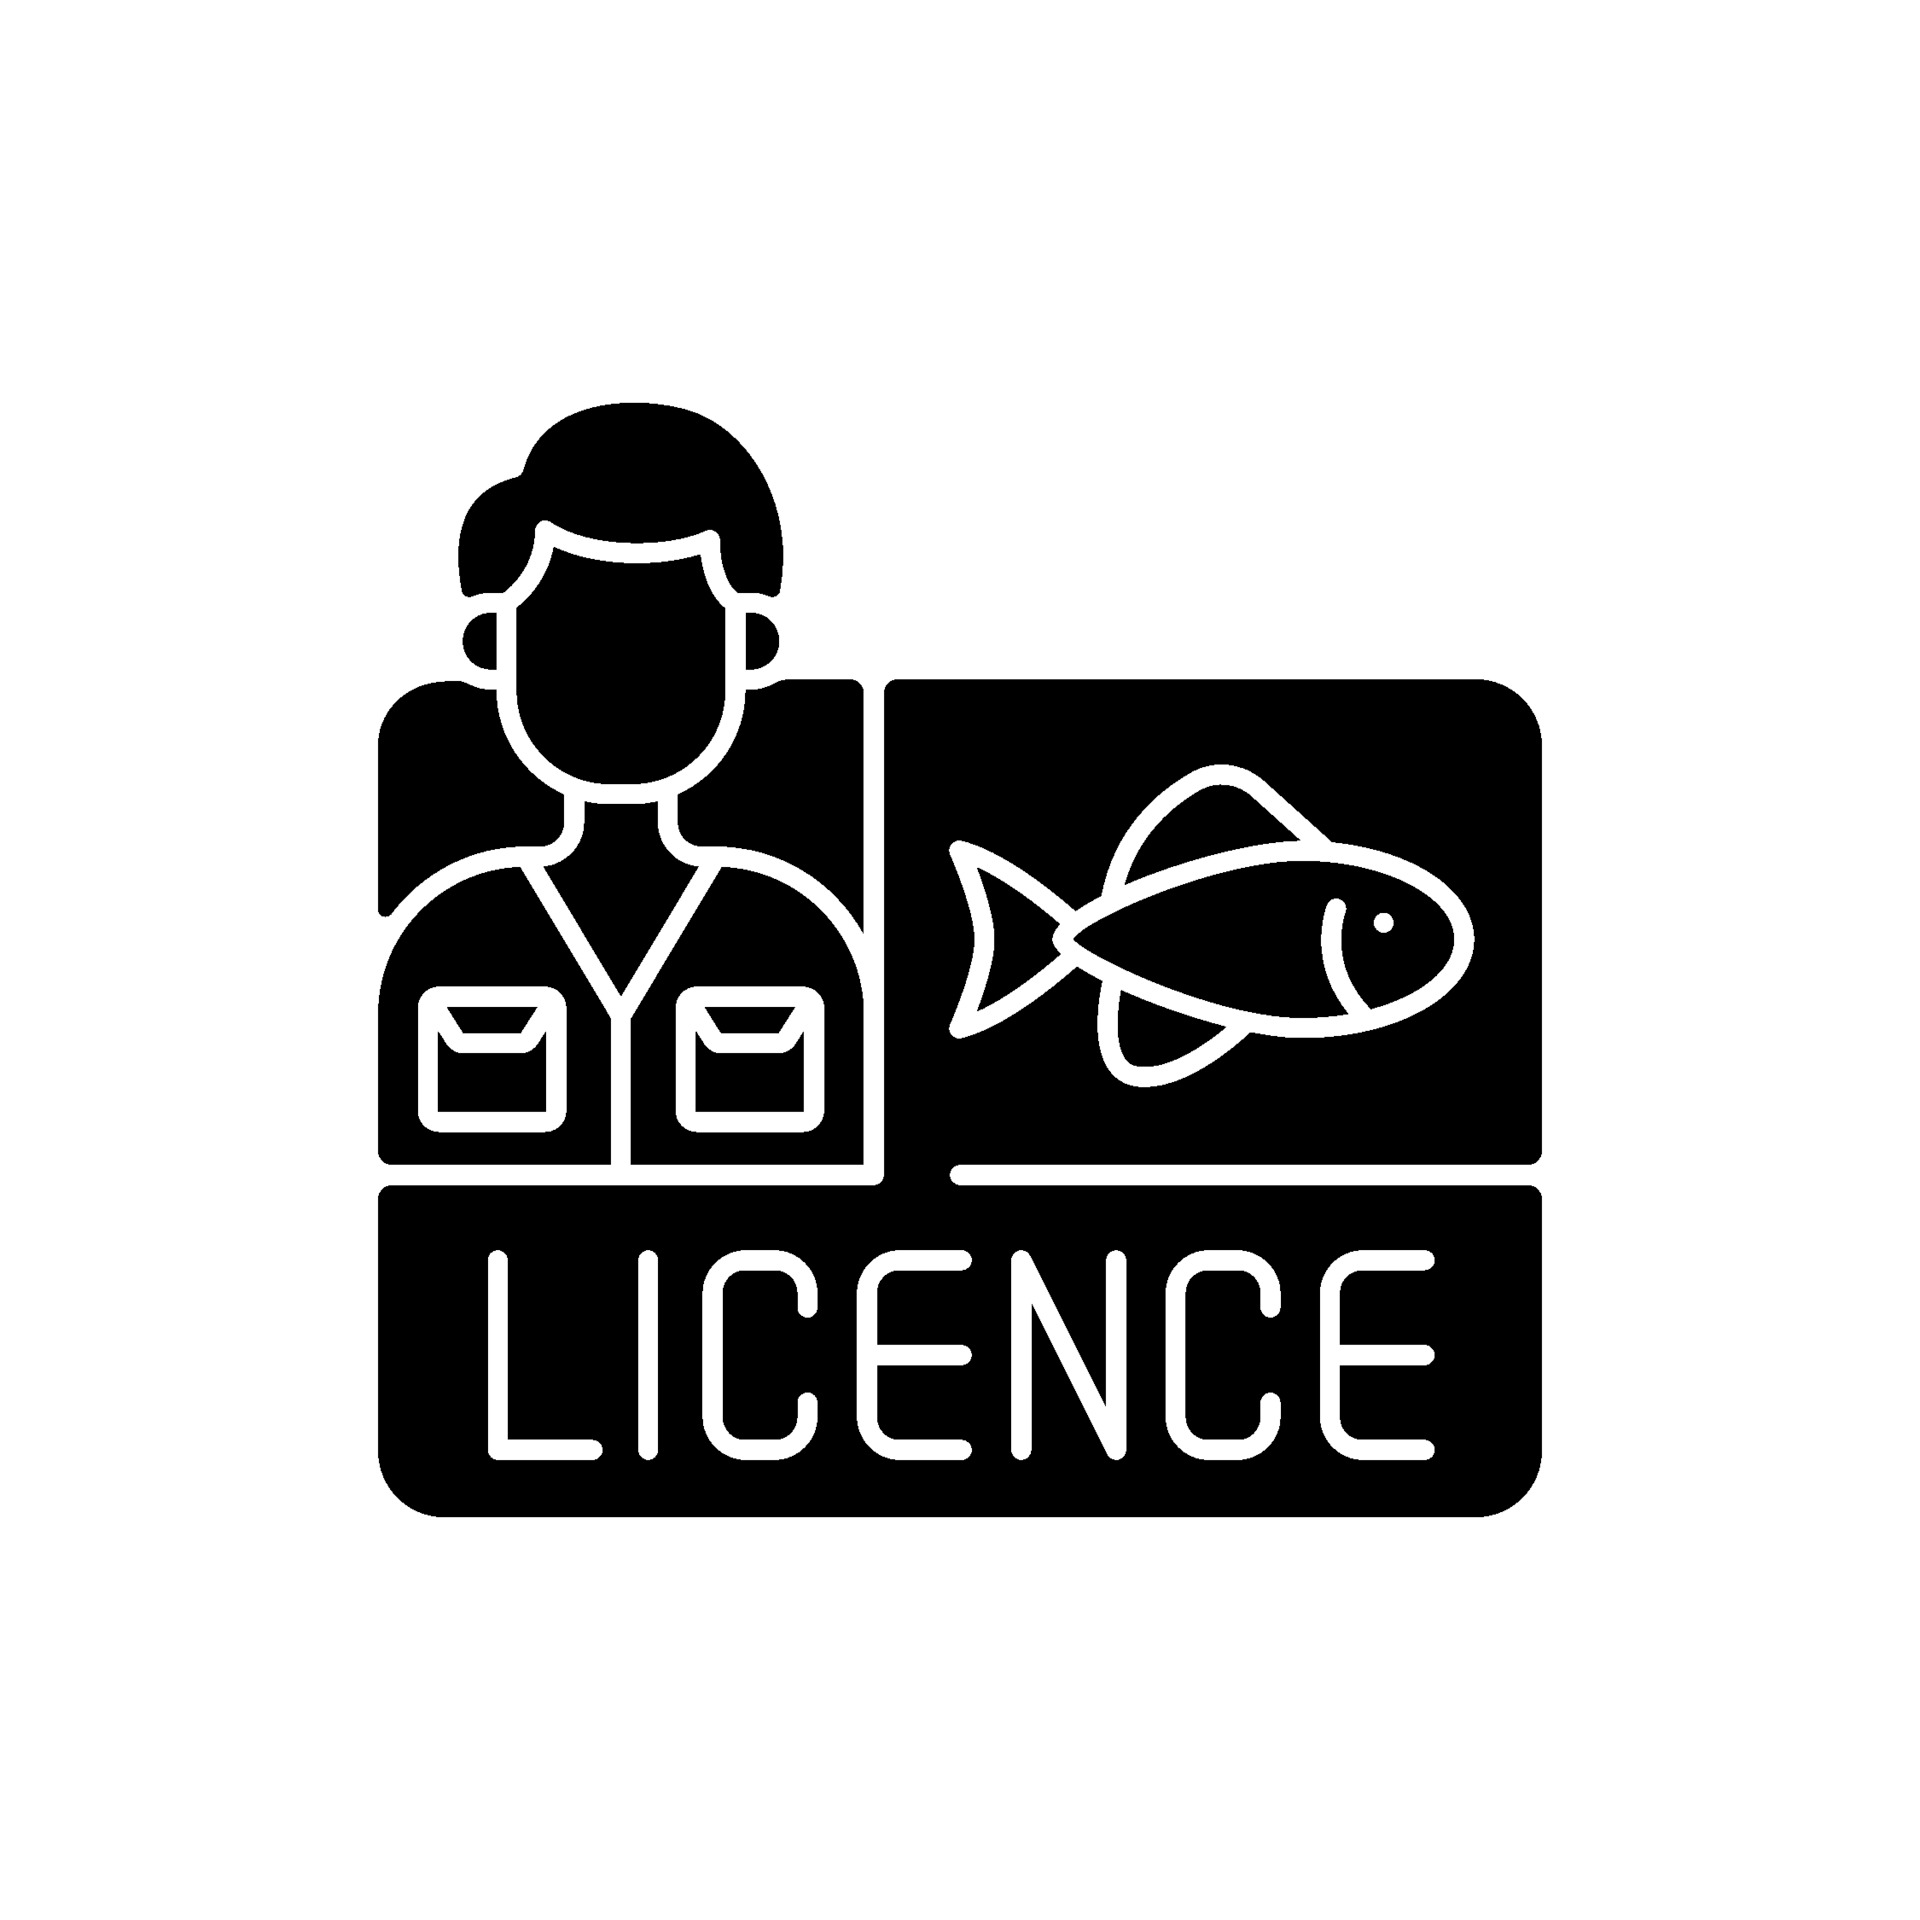 https://static.vecteezy.com/system/resources/previews/002/061/921/original/fishing-license-black-glyph-icon-vector.jpg